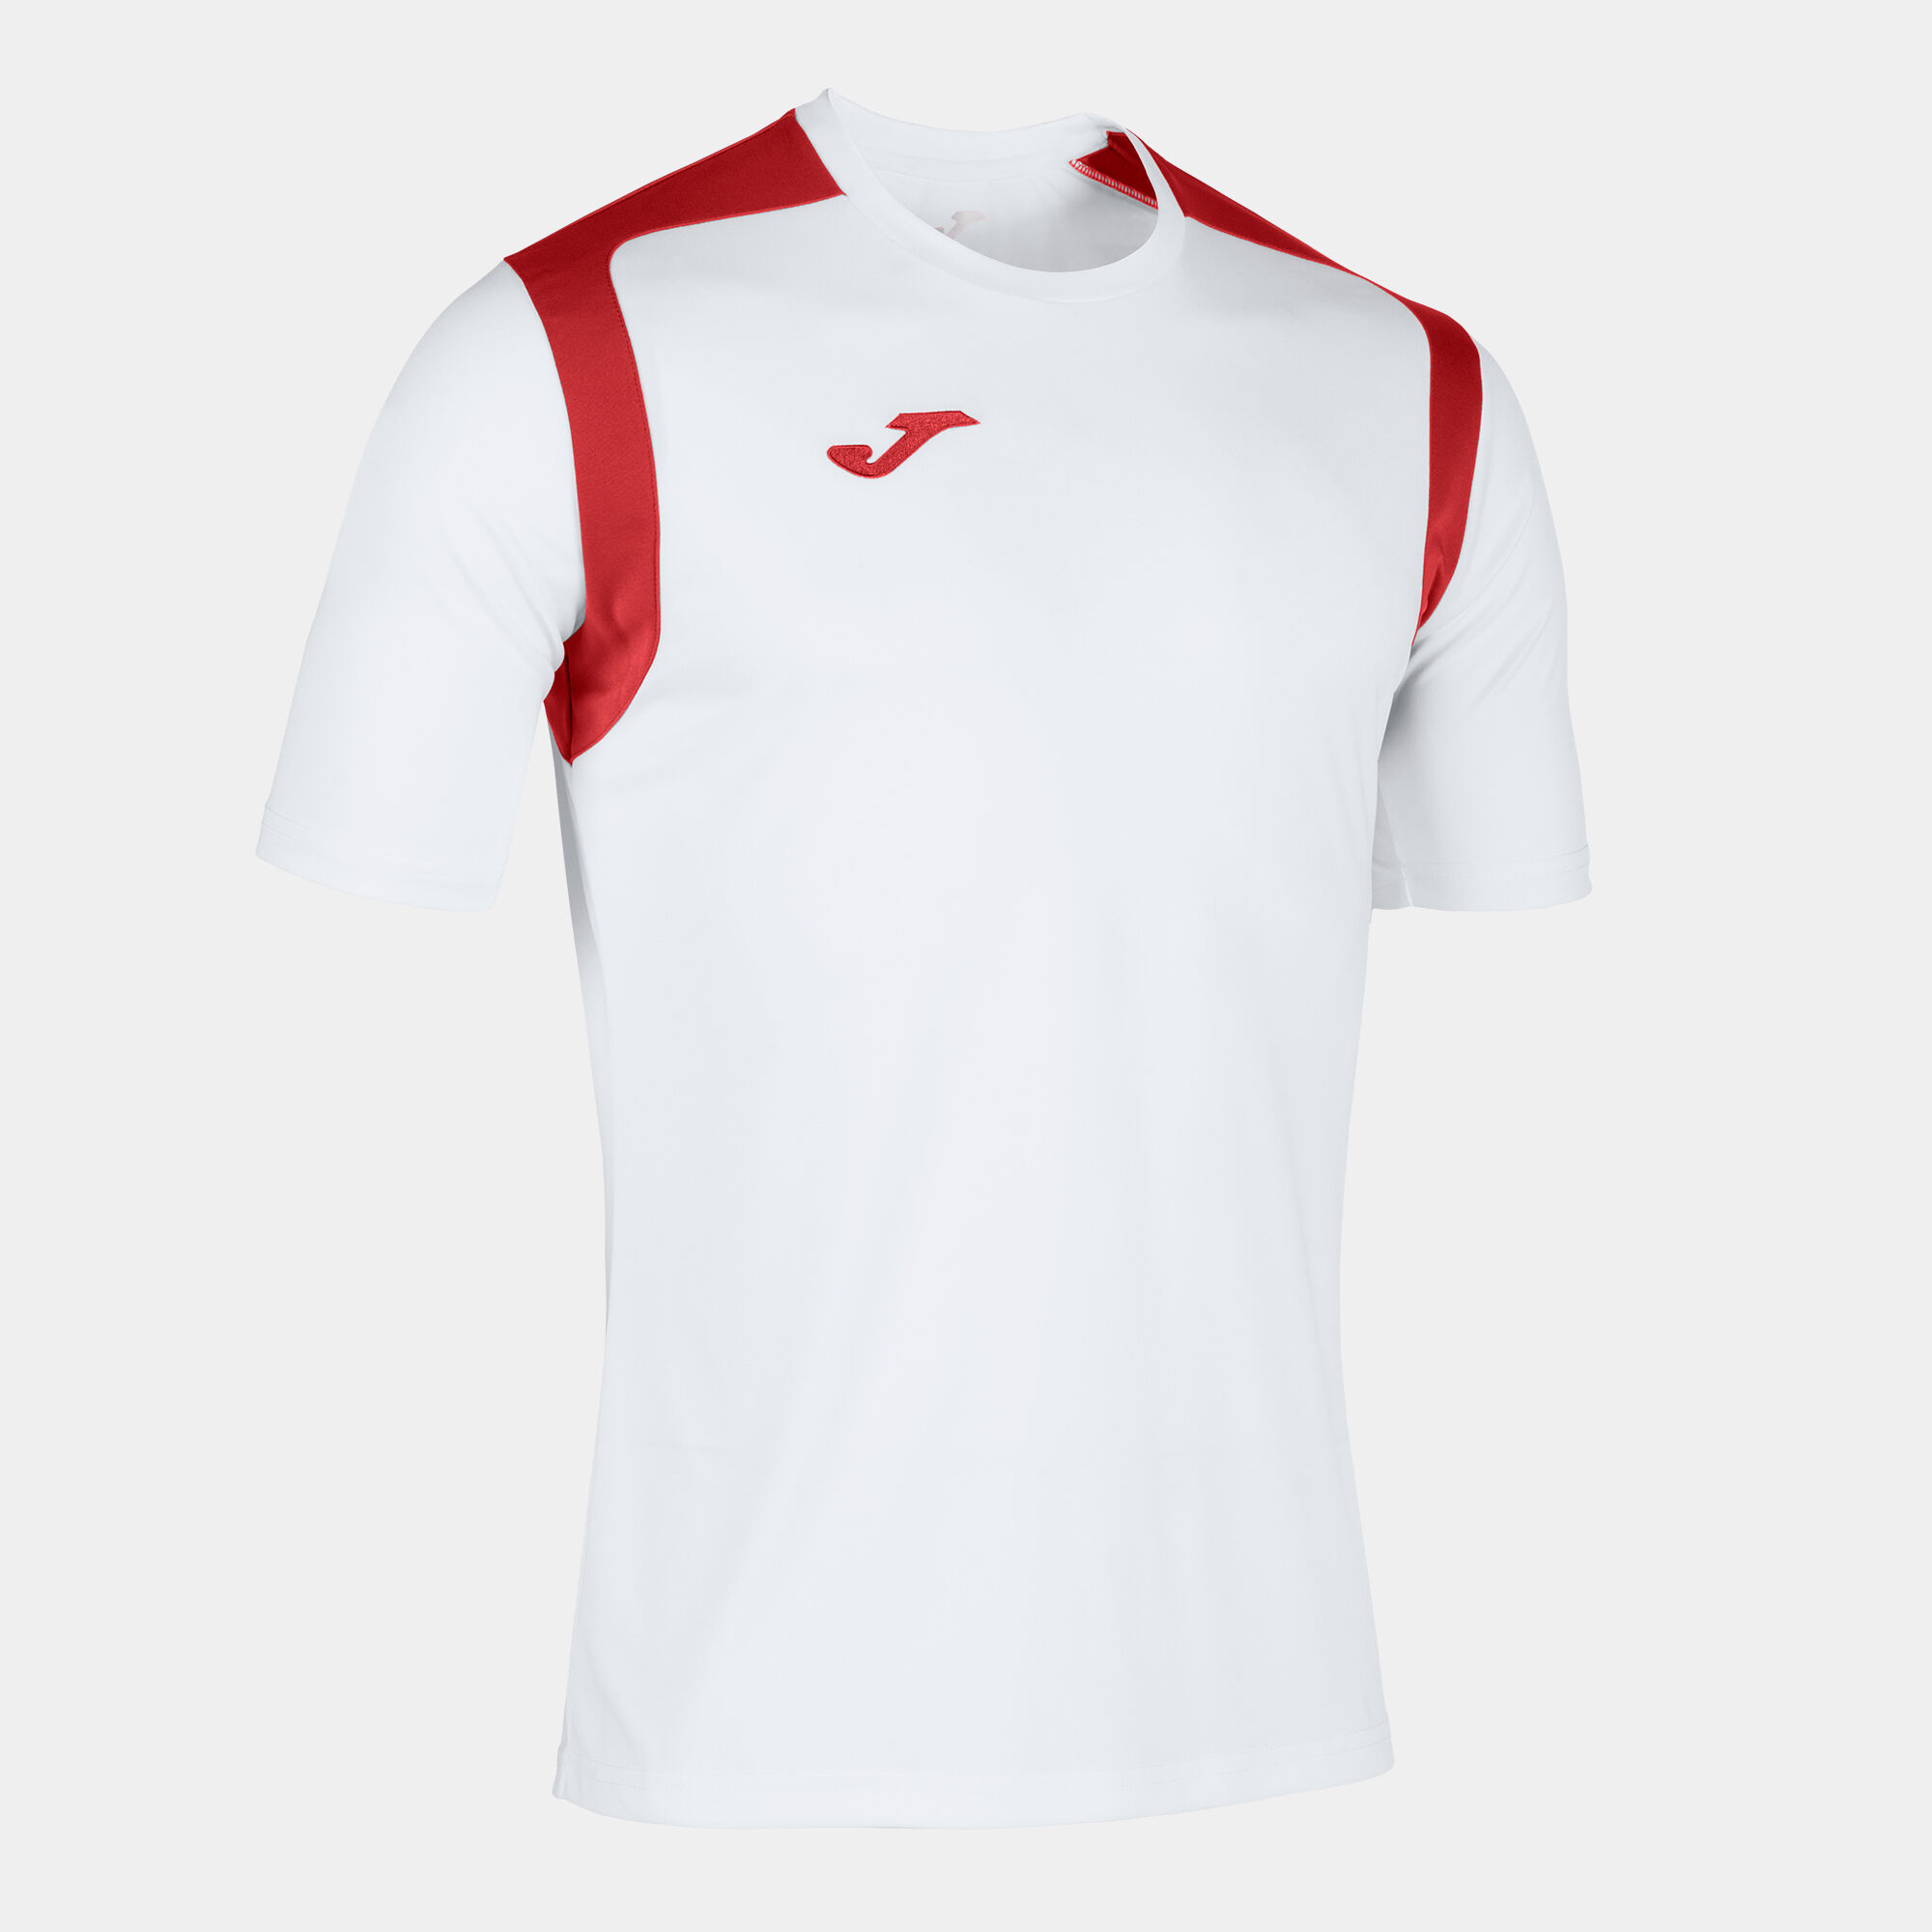 MAILLOT MANCHES COURTES HOMME CHAMPIONSHIP V BLANC ROUGE